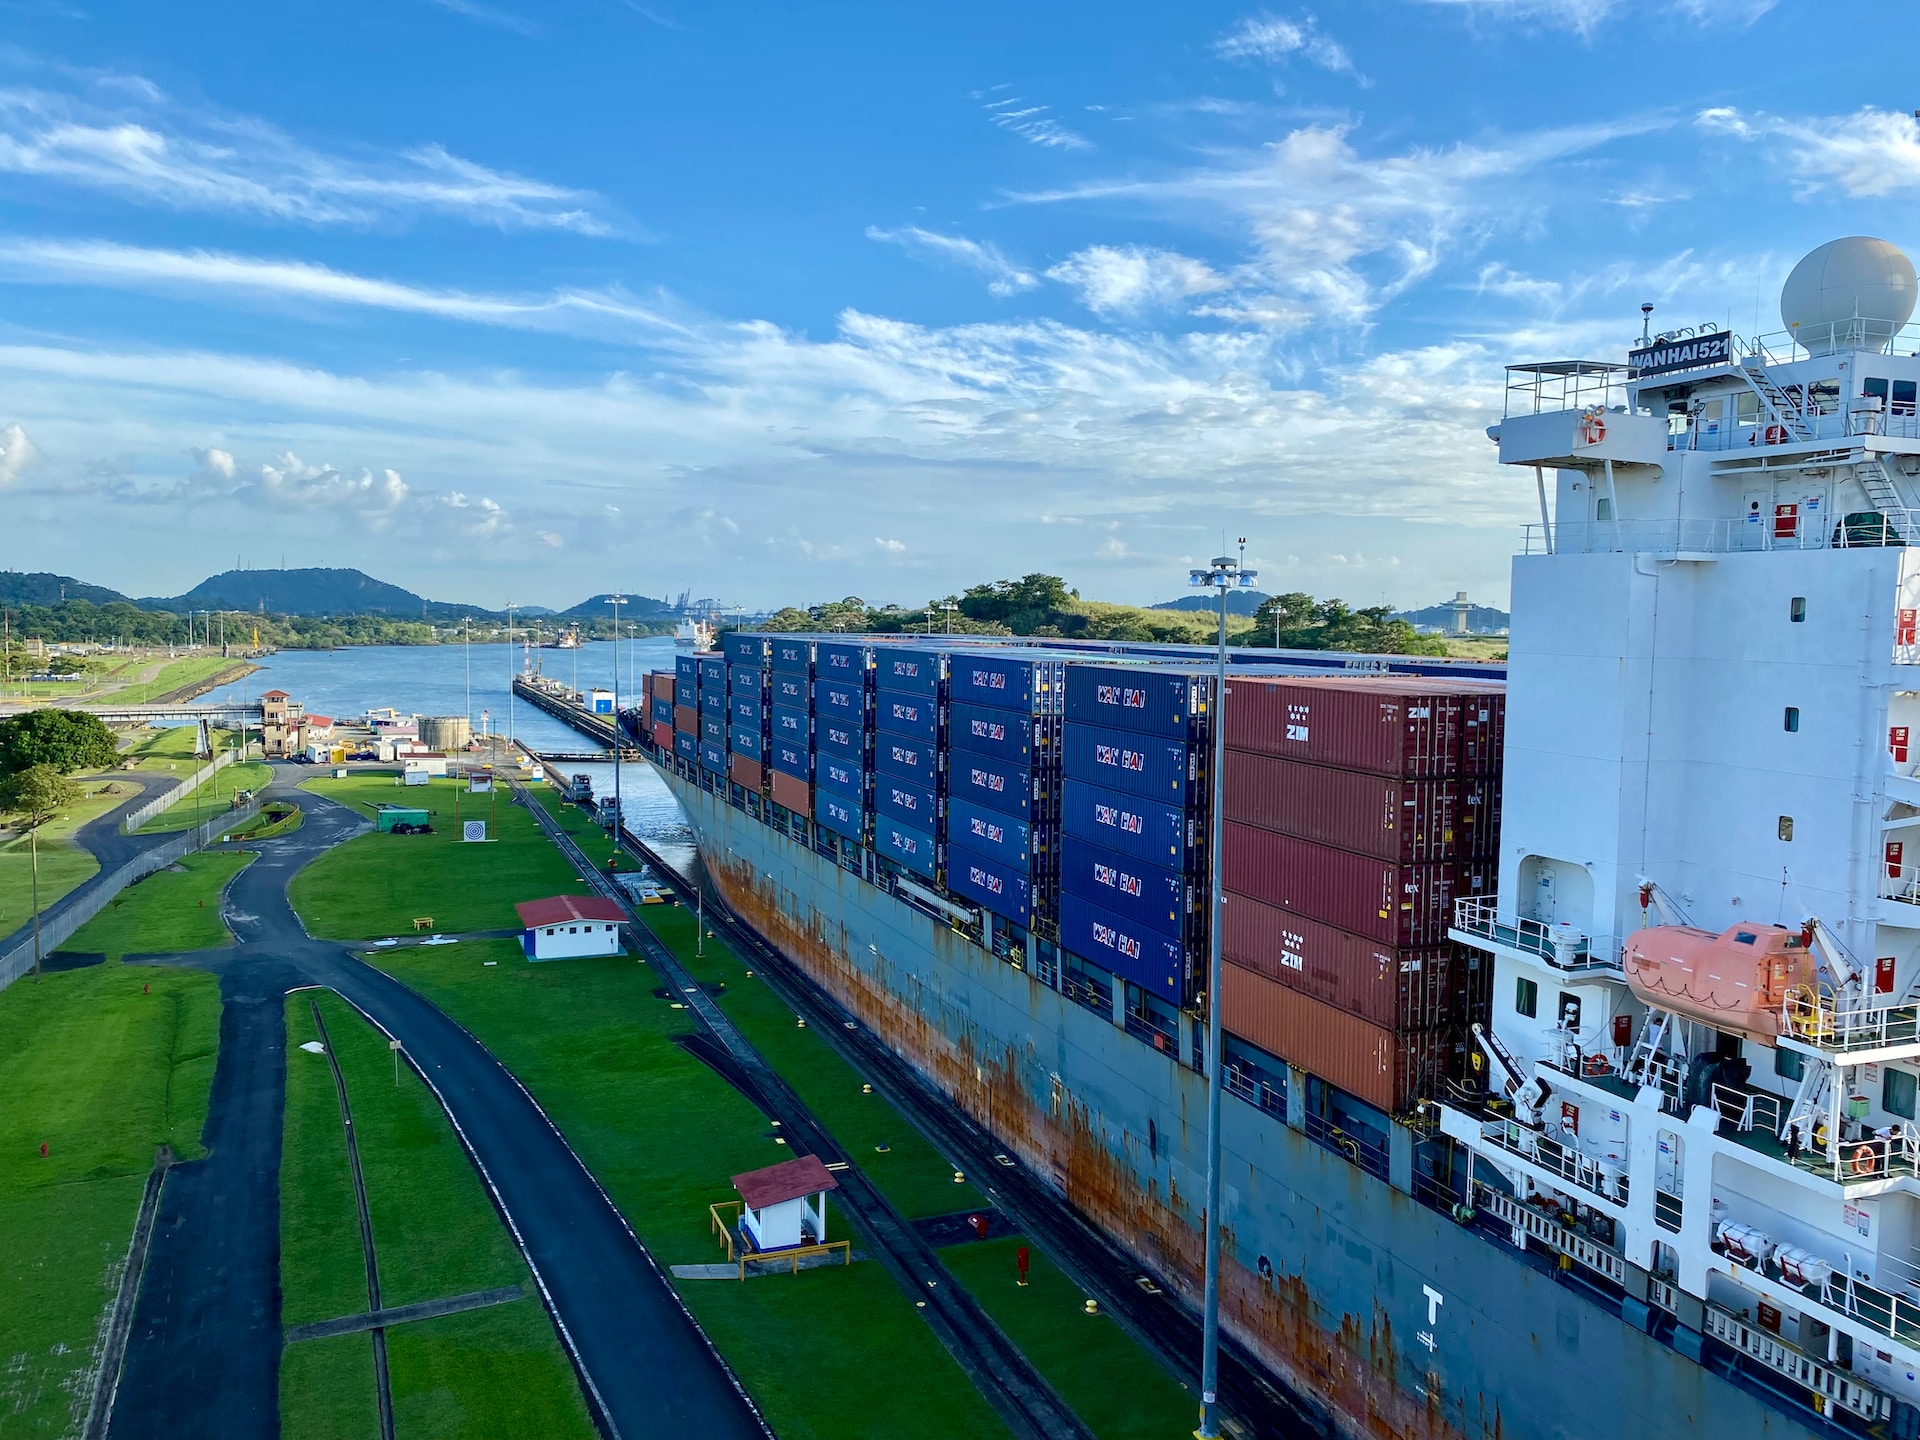 Price of Skipping Panama Canal Queues Drops Significantly